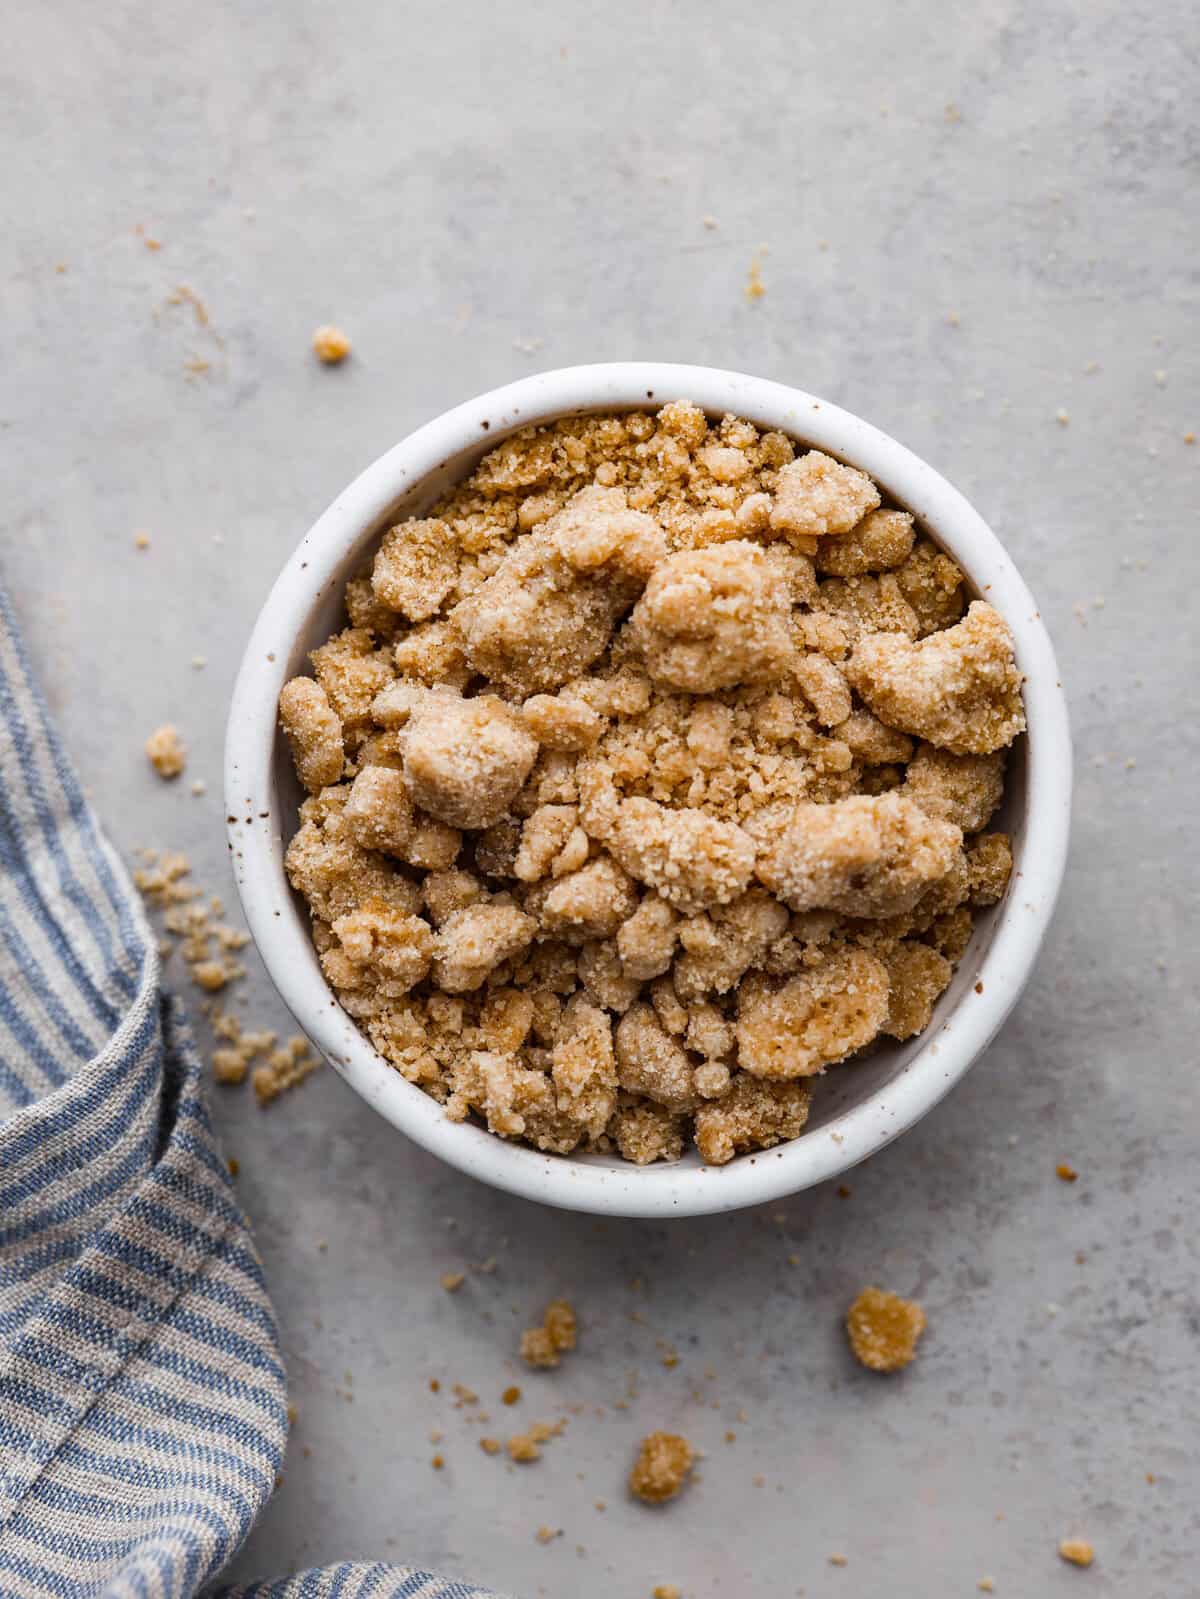 Brown Sugar Streusel (Easy Topping for Baking)